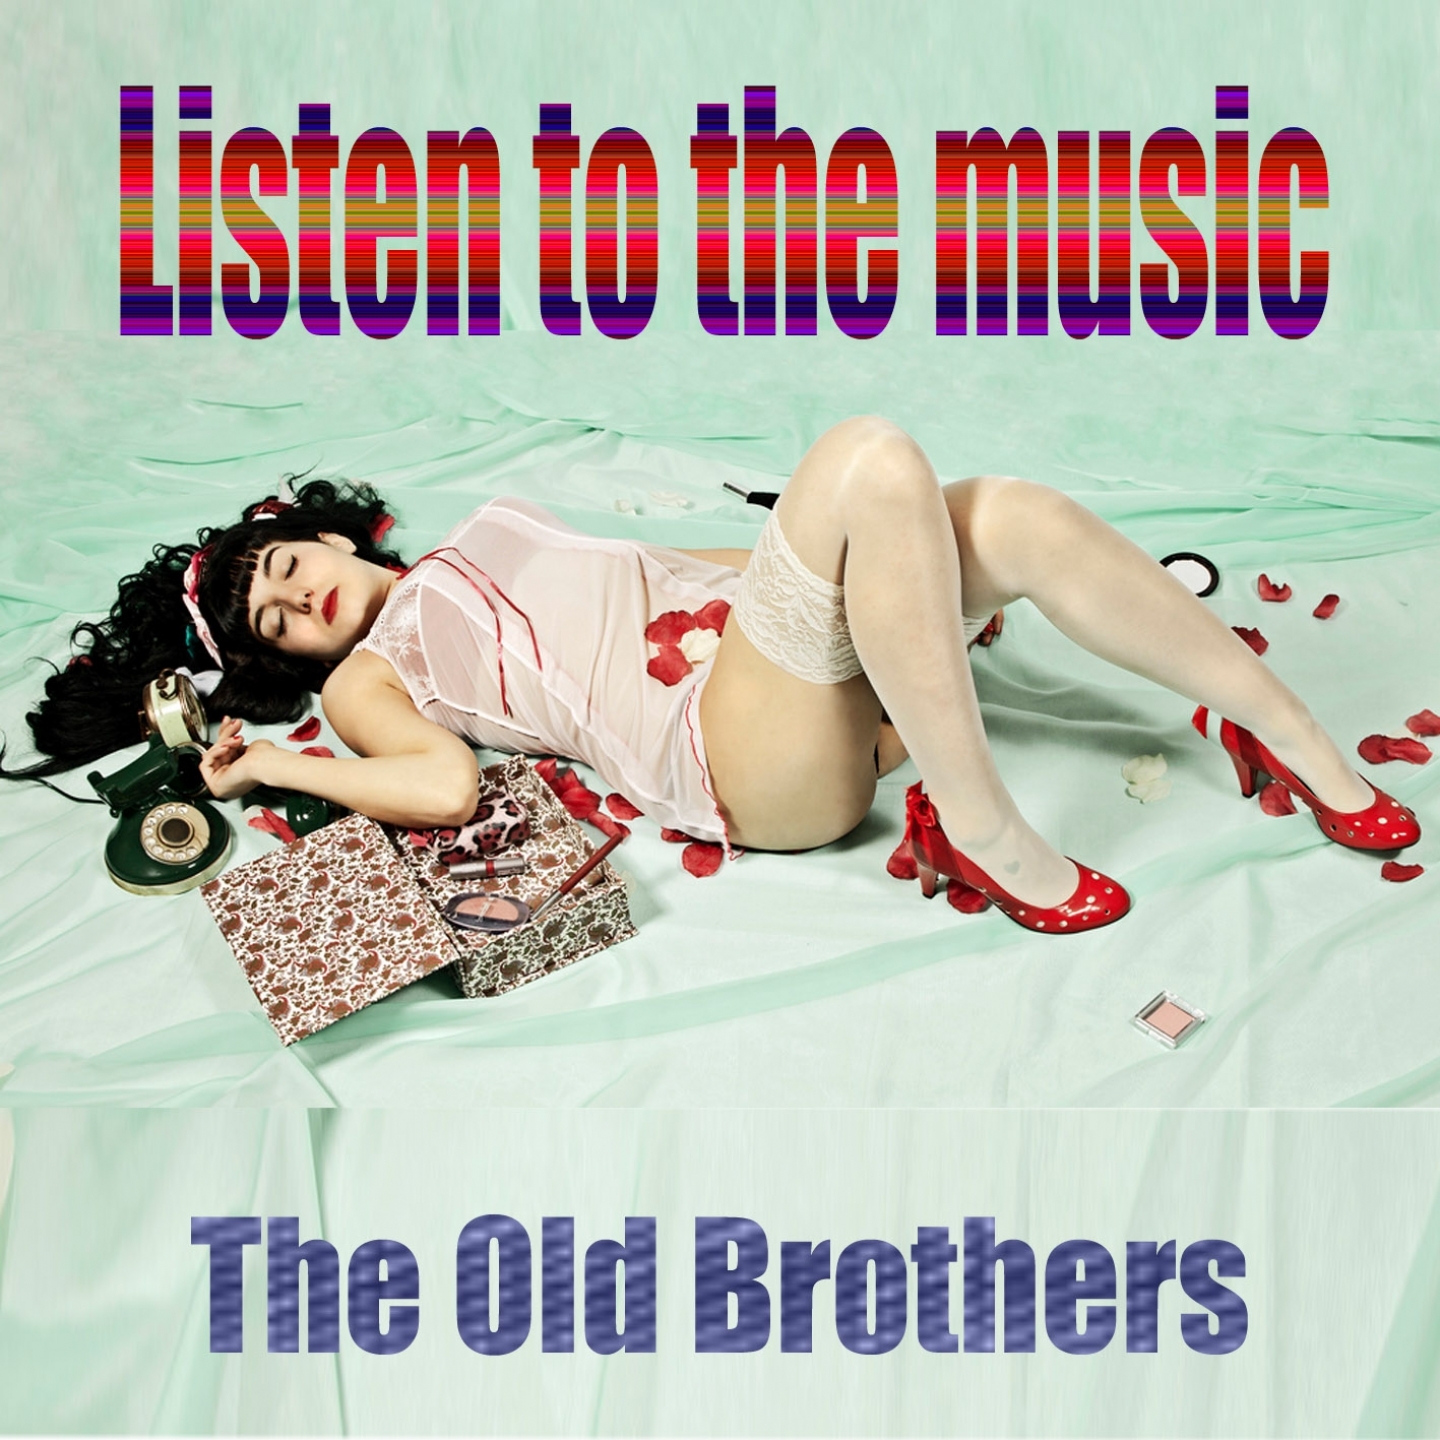 Listen to the Music (Cover Music, Old Music, Vintage, Rock'n'roll,)